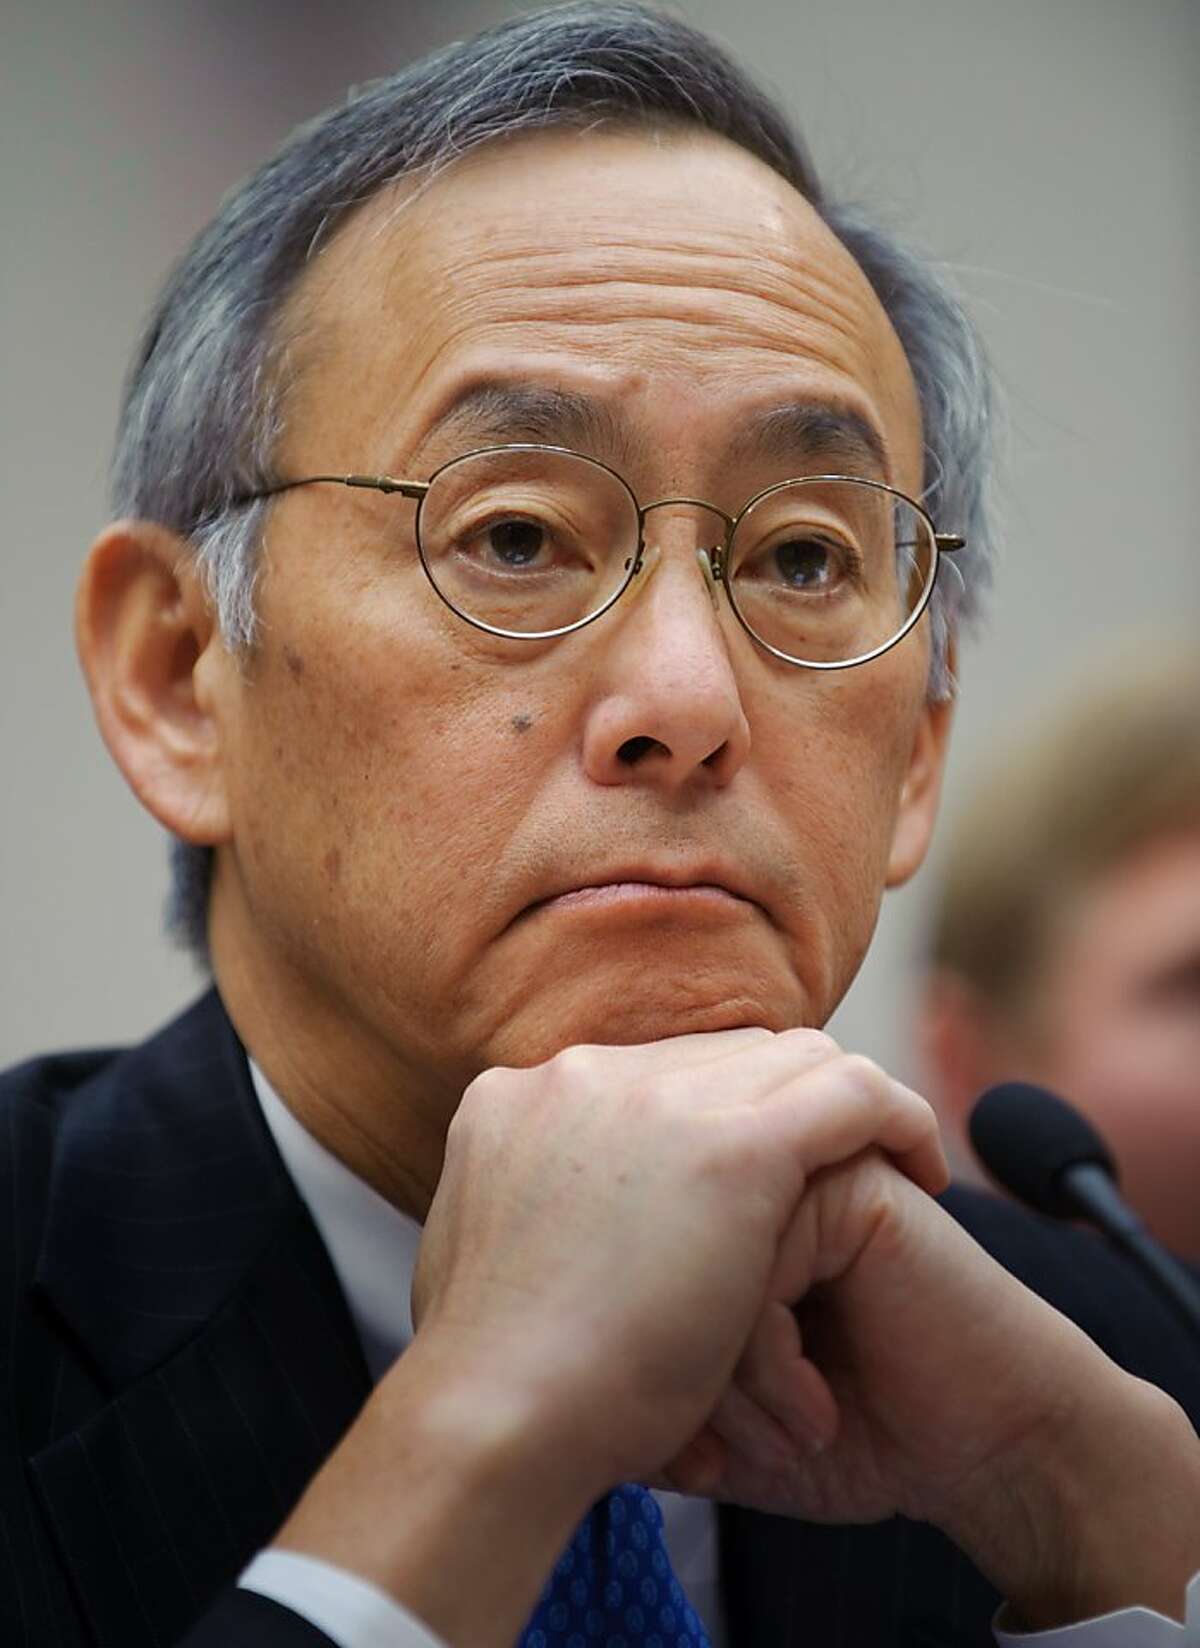 Energy Secretary Steven Chu listens to a speaker during the House Energy and Commerce Committee on the bankrupt solar panel manufacturer Solyndra November 17, 2011 at the Rayburn House Office Building on Capitol Hill in Washington, DC. Solyndra received a$528 million federal loan before going belly-up and laying off its 1,100 workers.